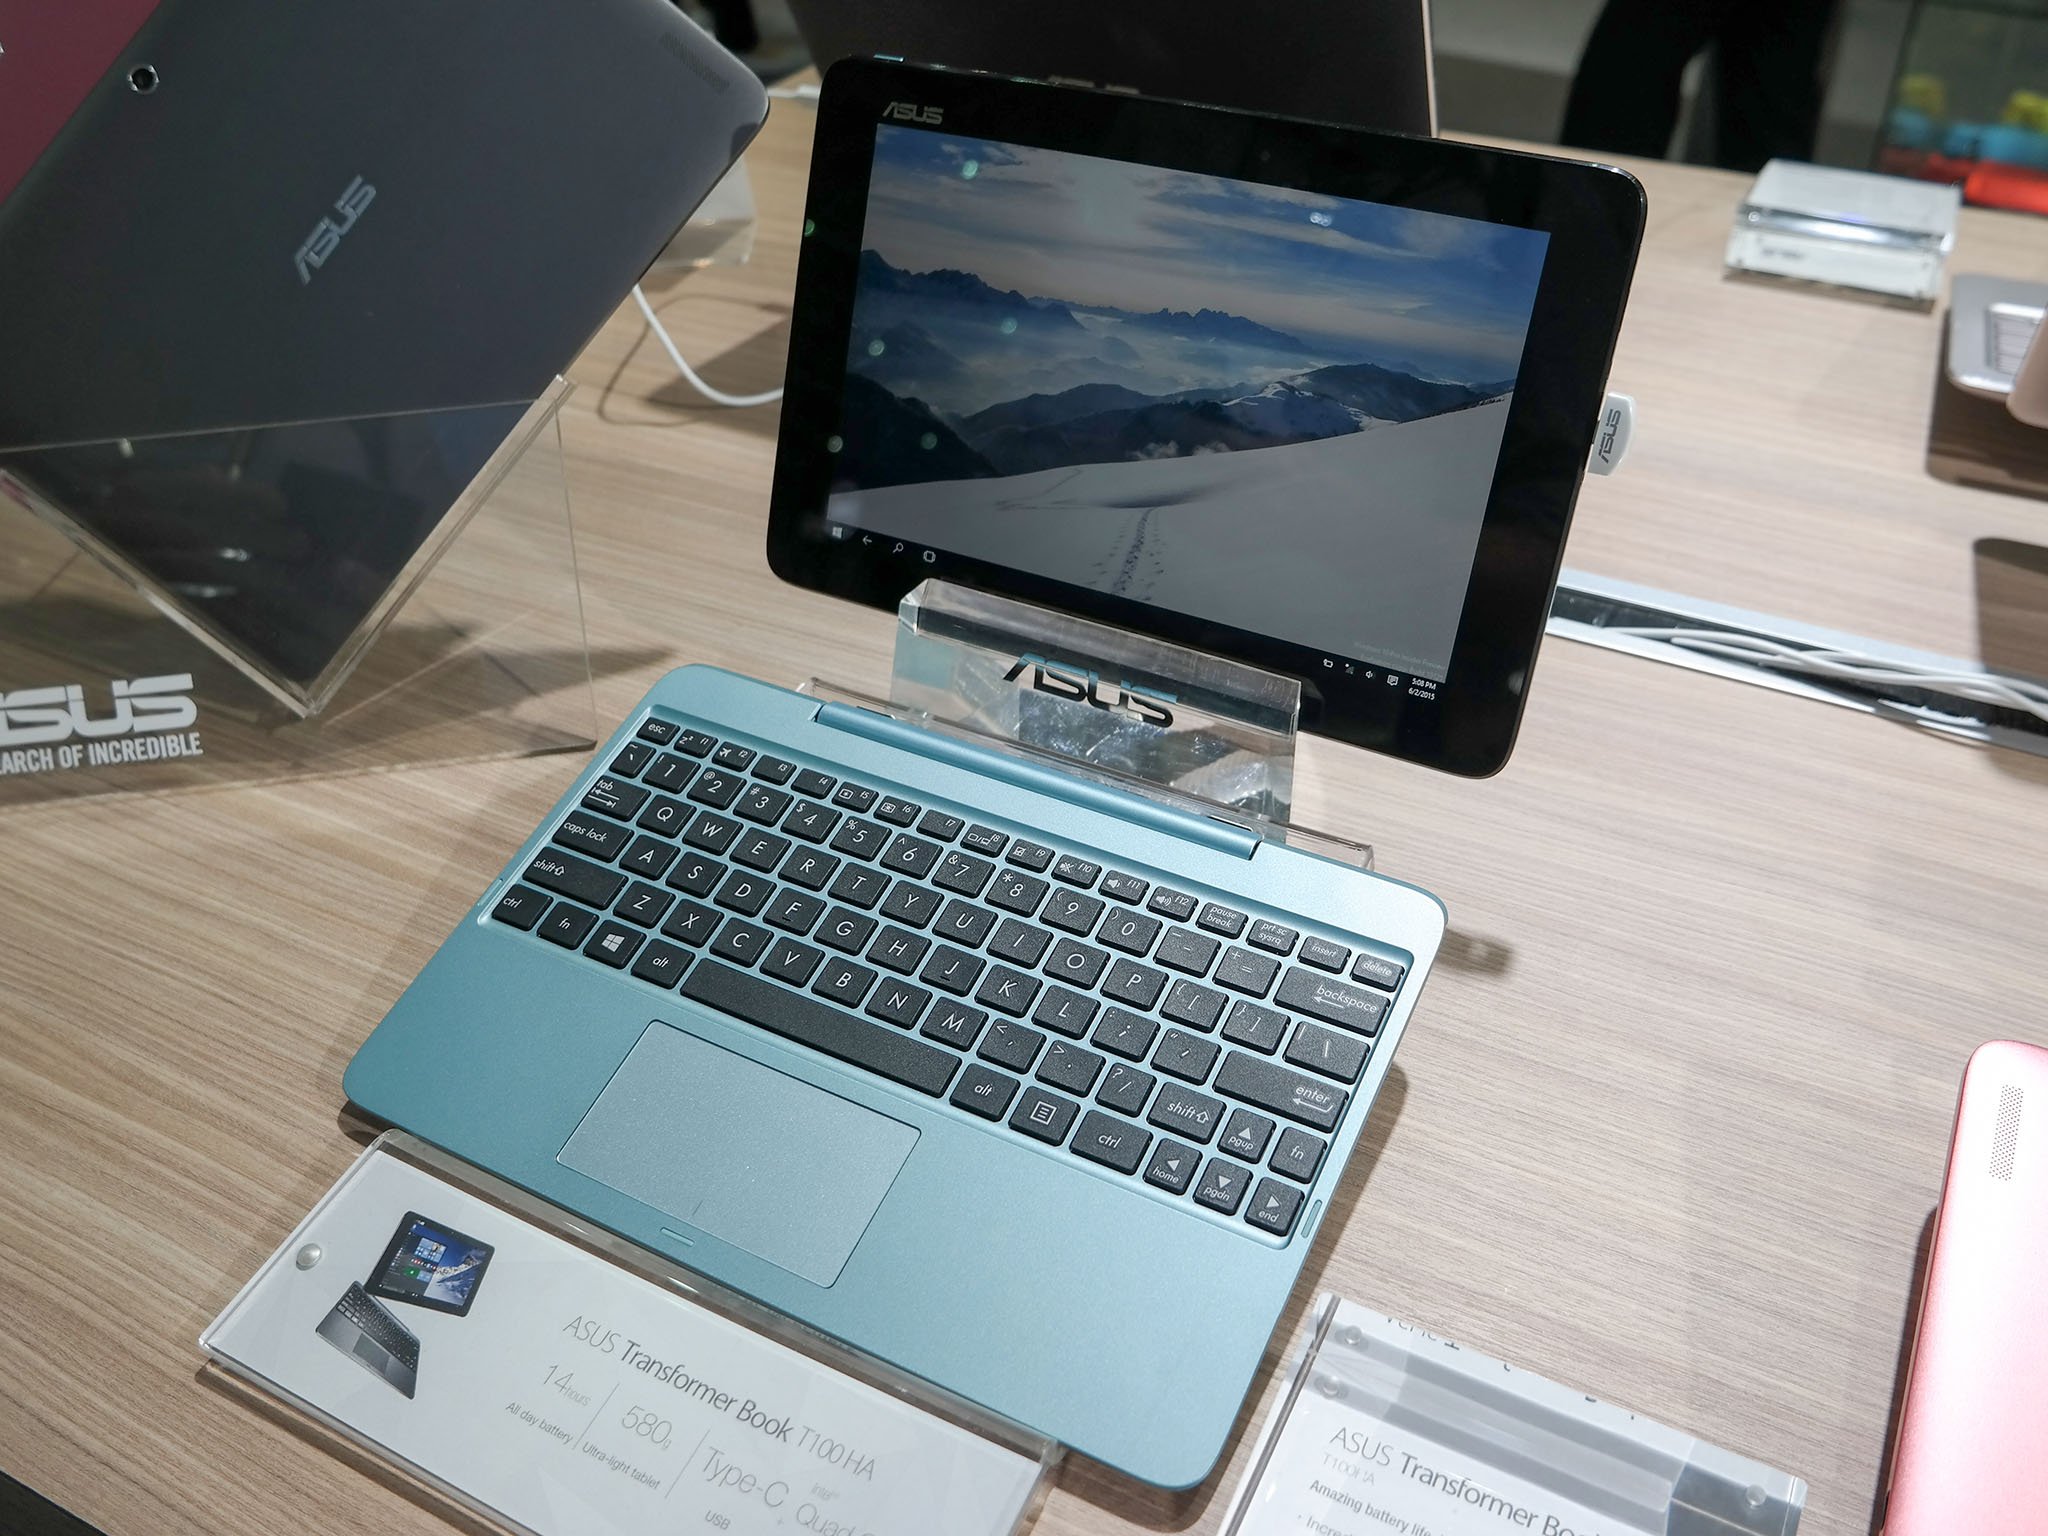 Hands-on with the ASUS Transformer Book T100HA with Windows 10